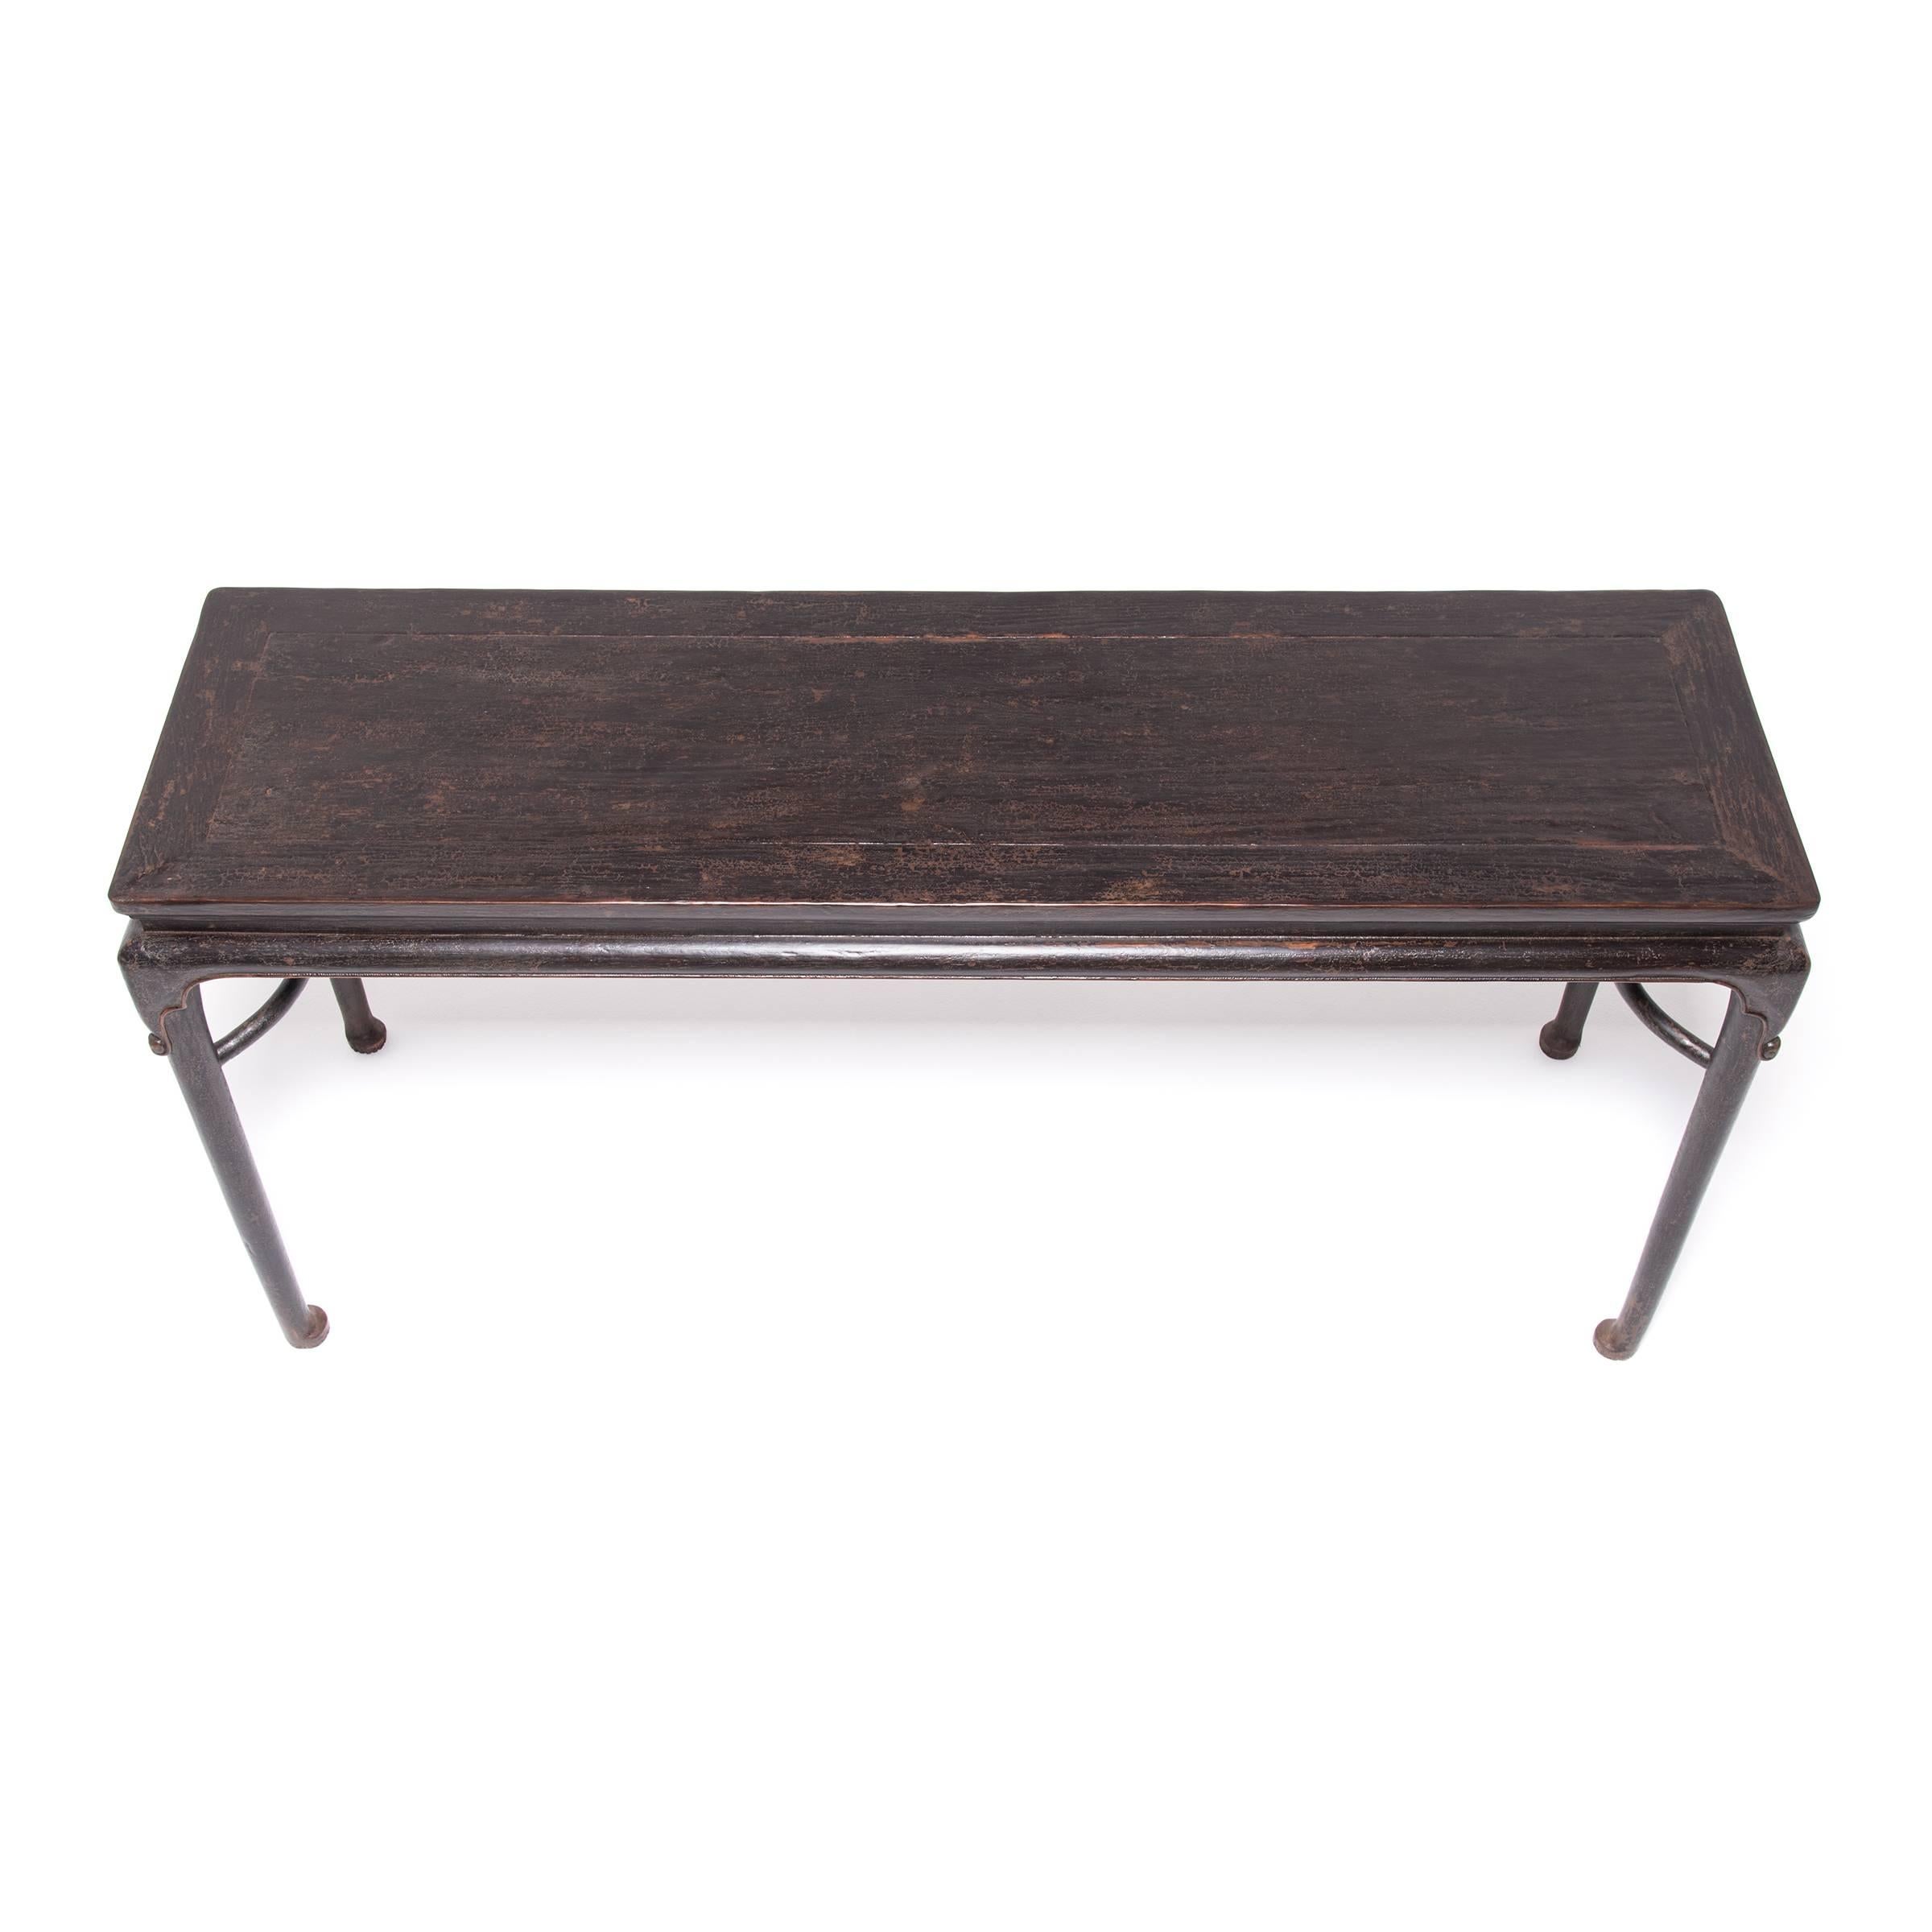 Elm Mid-19th Century Chinese Waisted Lacquer Altar Table with Hoof Feet